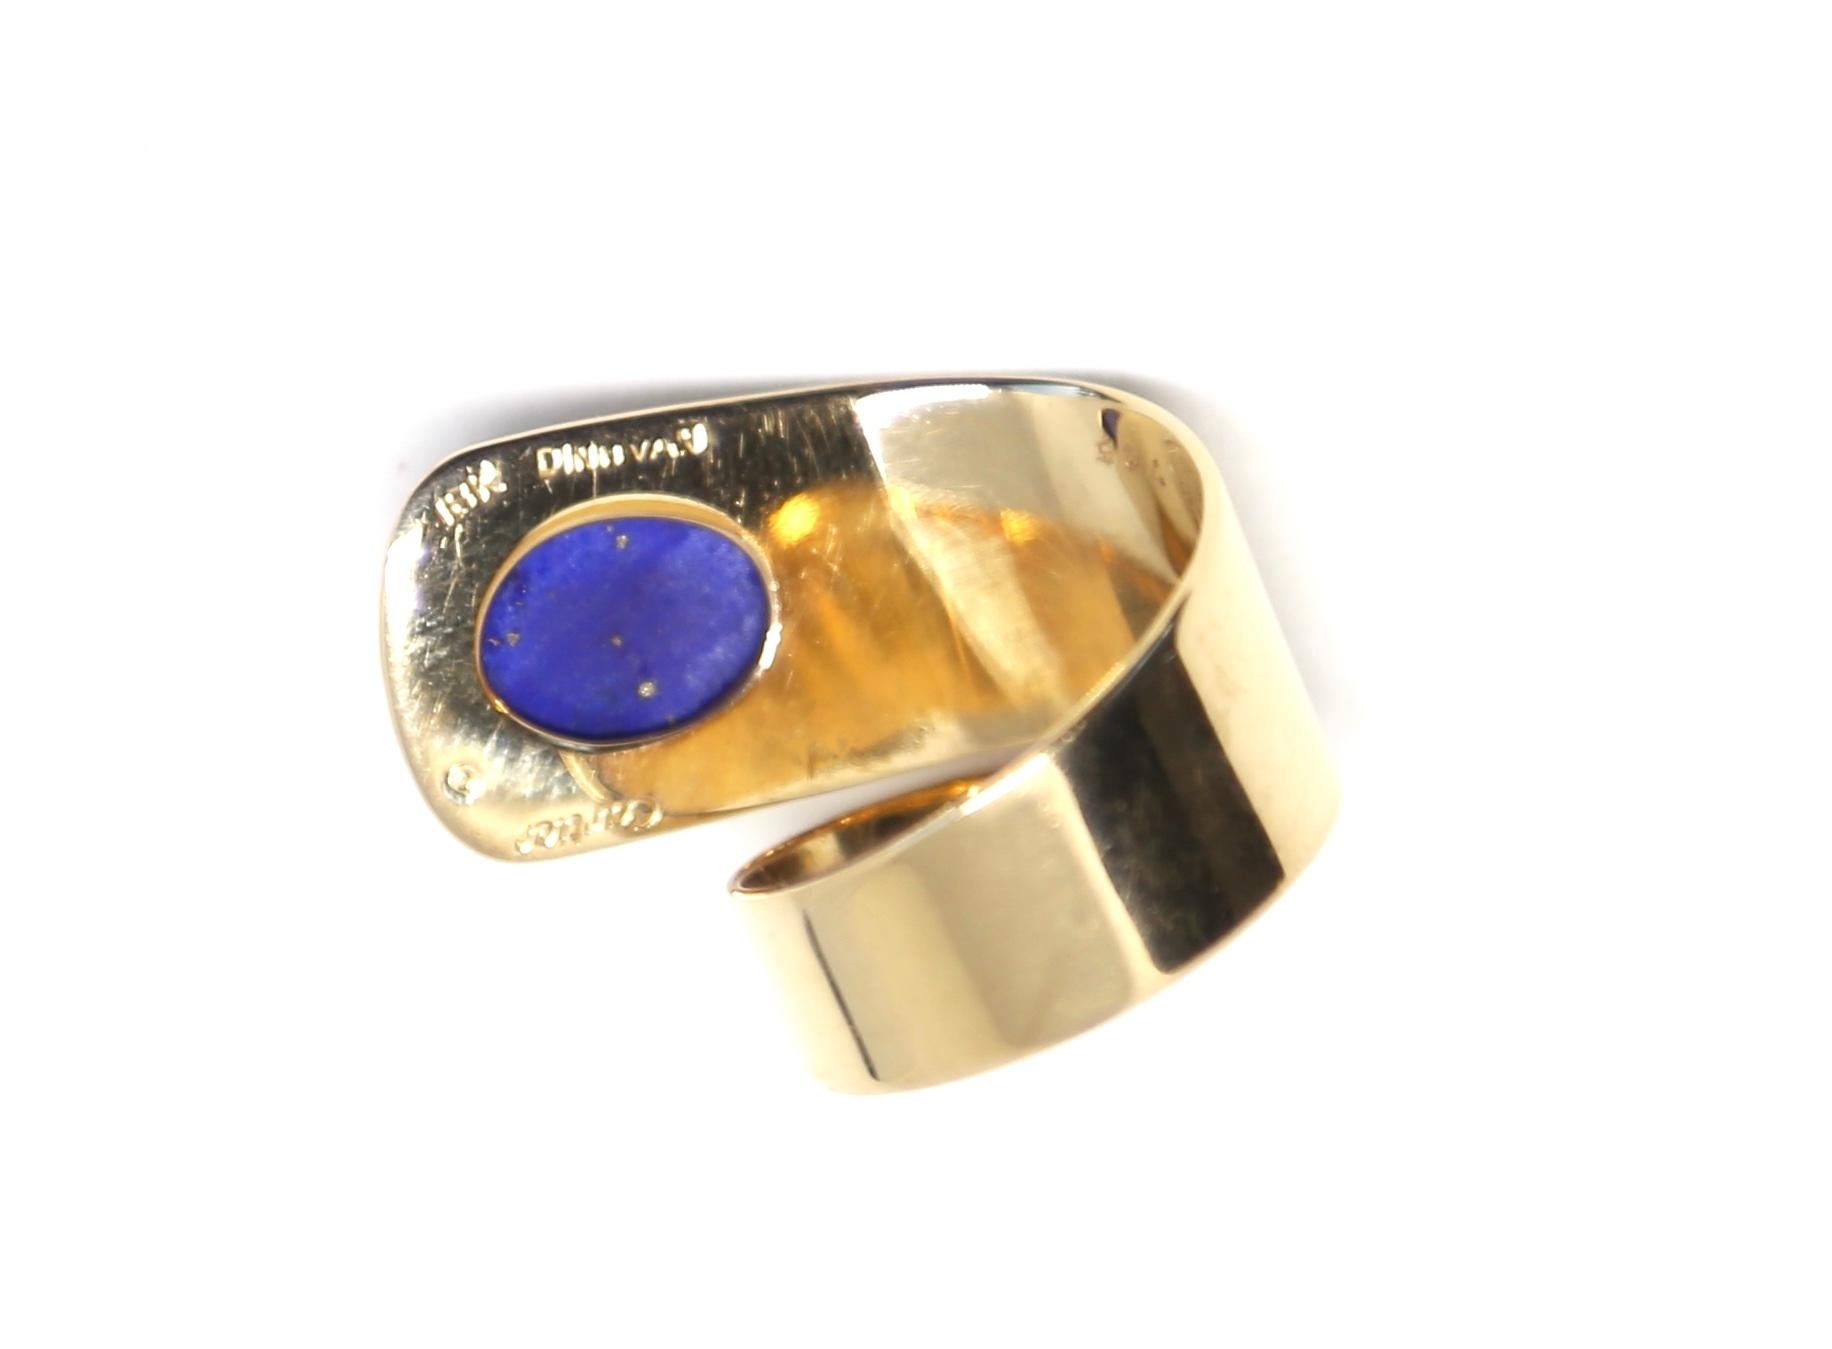 Cabochon 1960s Dinh Van for Cartier 18k Gold and Lapis Lazuli Modernist Ring For Sale